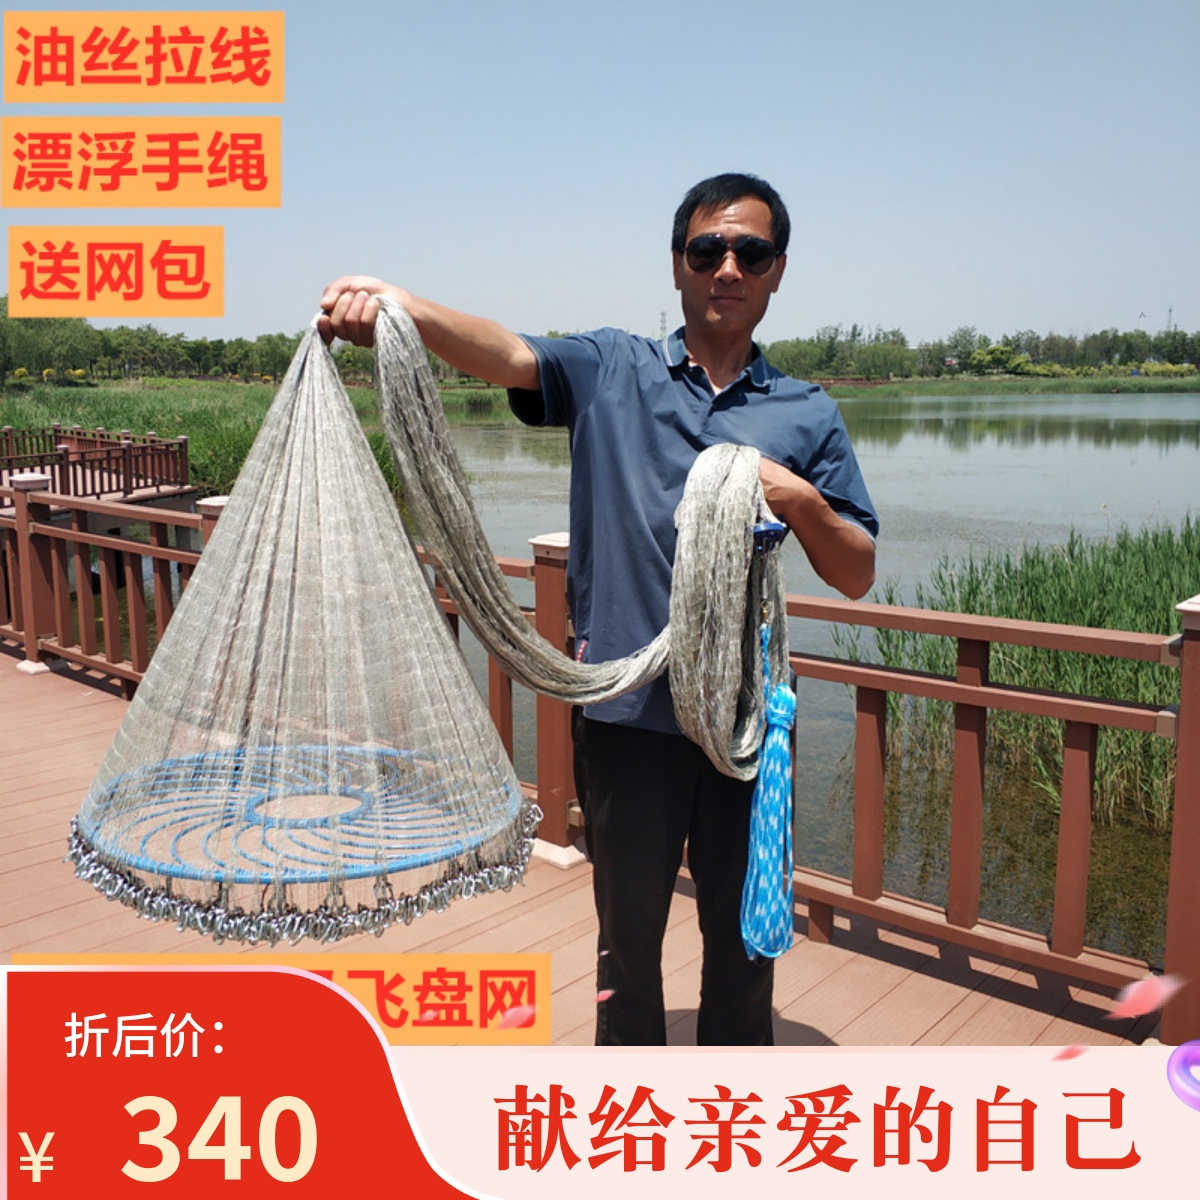 Large Flying Disc Hand Burnout Nets Handmade Vigorous Horse Wire Sarnet Flying Disc Fish Nets Pure Handmade Traditional Hand Throwing Nets Easy To Throw Nets